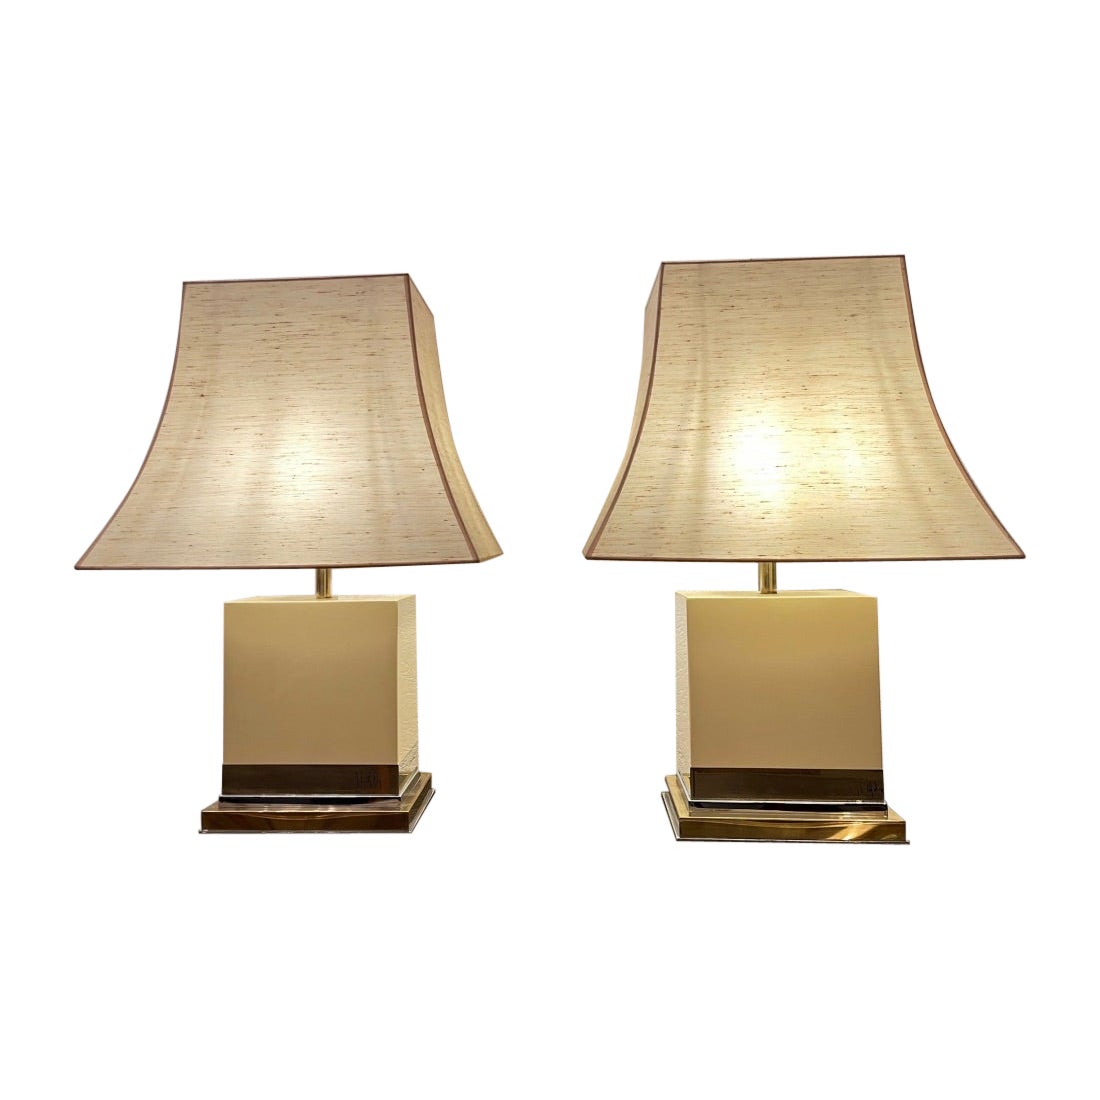 Pair of White Ivory Lacquered Wood & Brass Lamps by Jean Claude Mahey, ca. 1970s